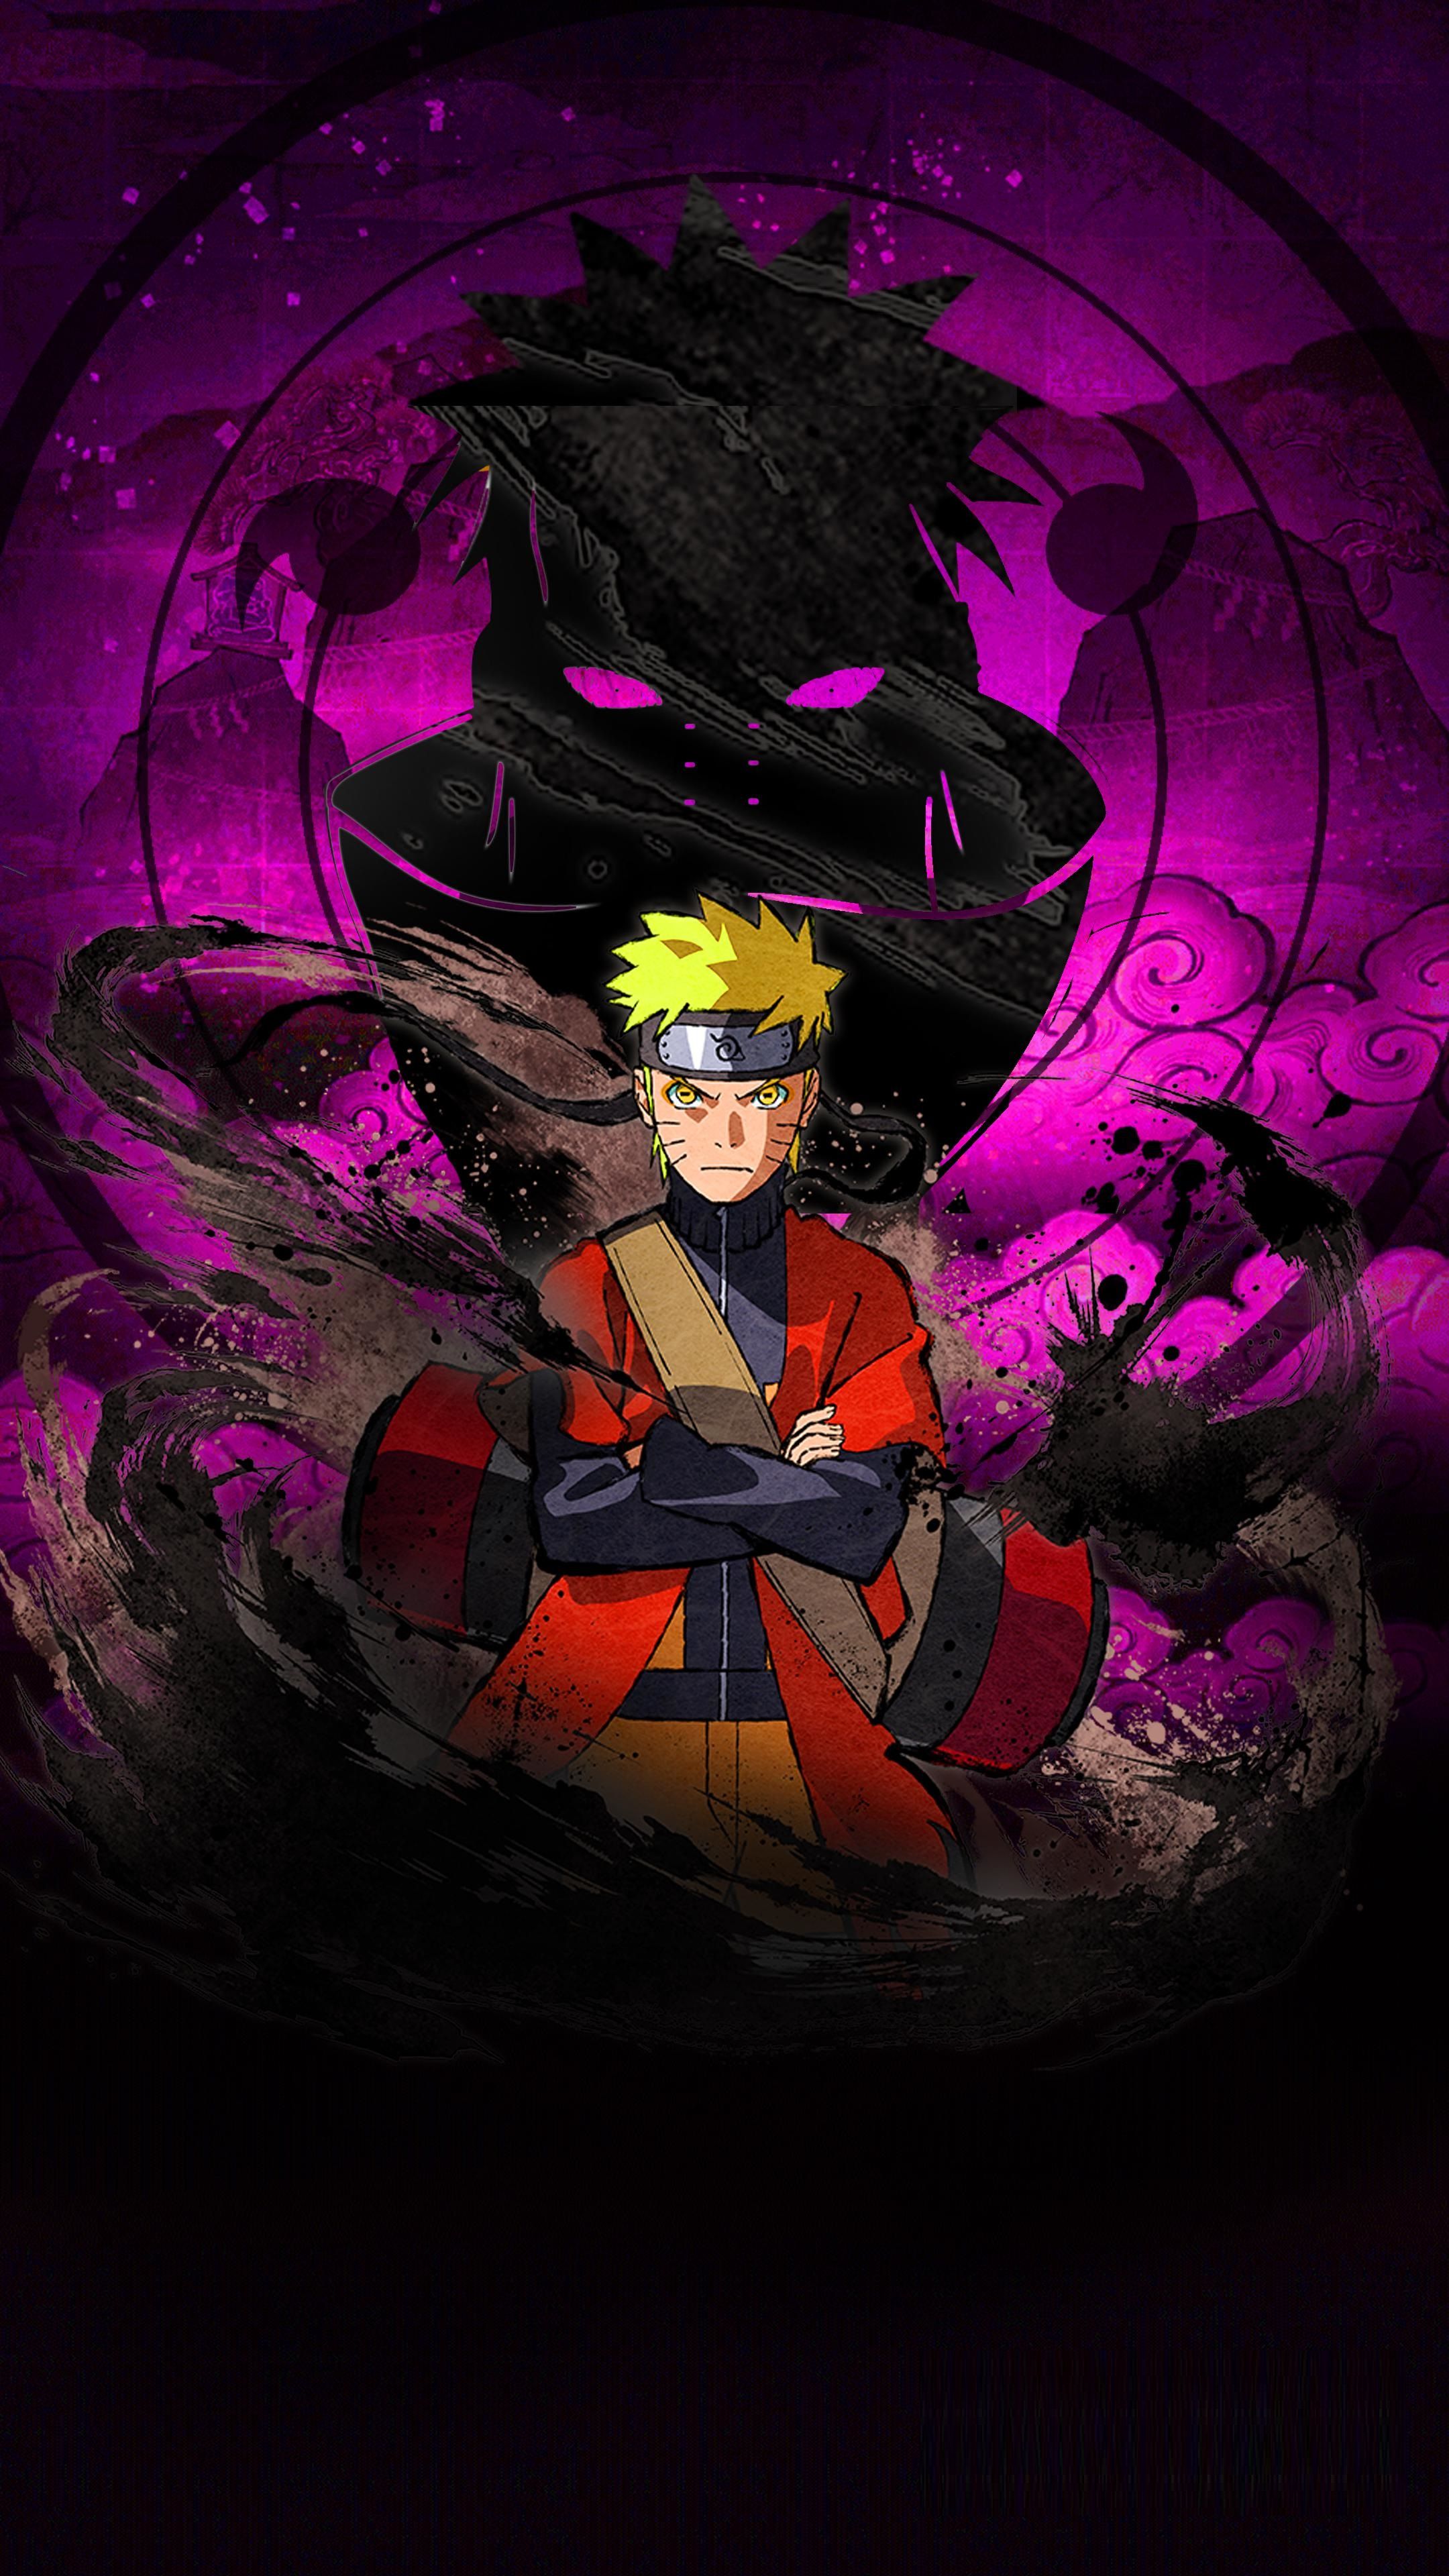 naruto pictures for wallpaper Naruto hd shippuden wallpapers wallpaper ...